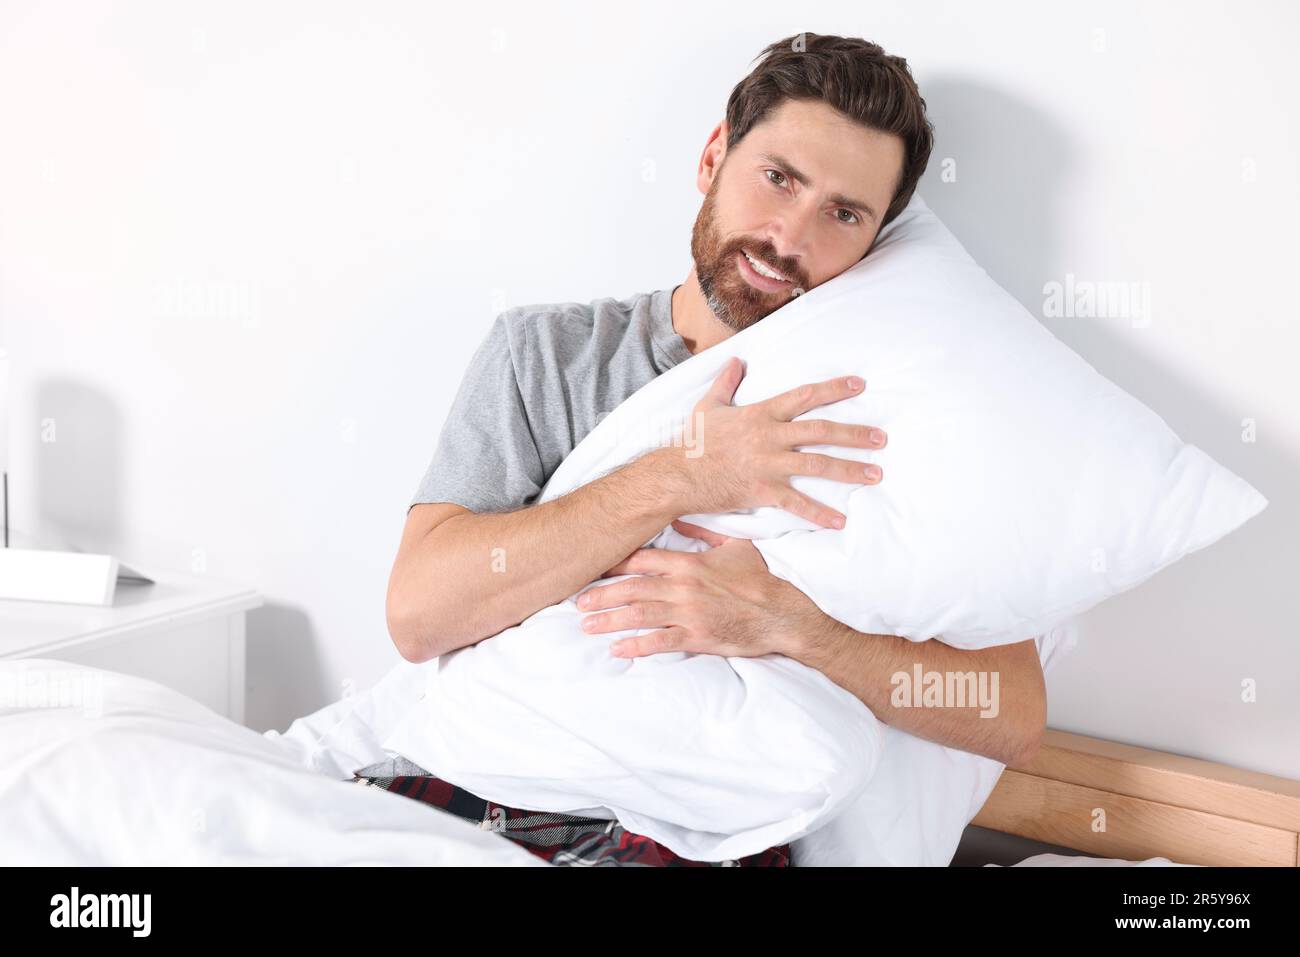 https://c8.alamy.com/comp/2R5Y96X/man-hugging-pillow-on-bed-at-home-2R5Y96X.jpg